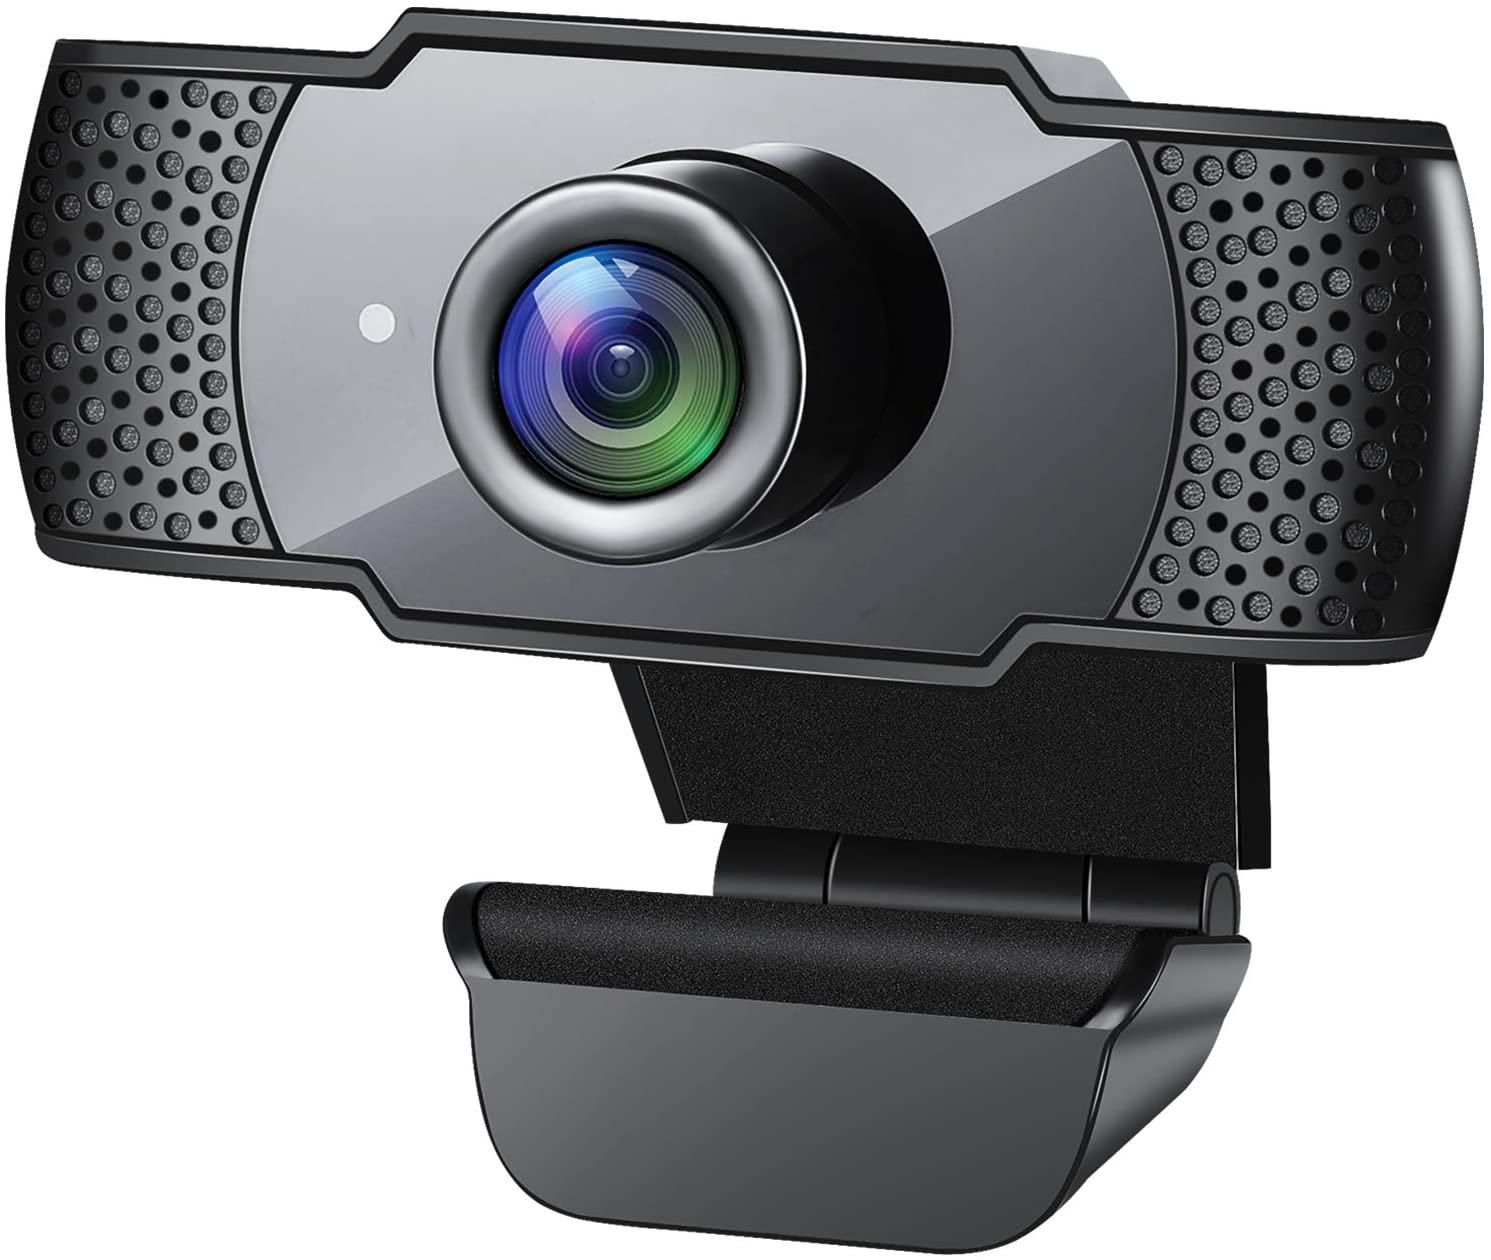 Zoom Webcam 1080p with Microphone for $25.19 Shipped